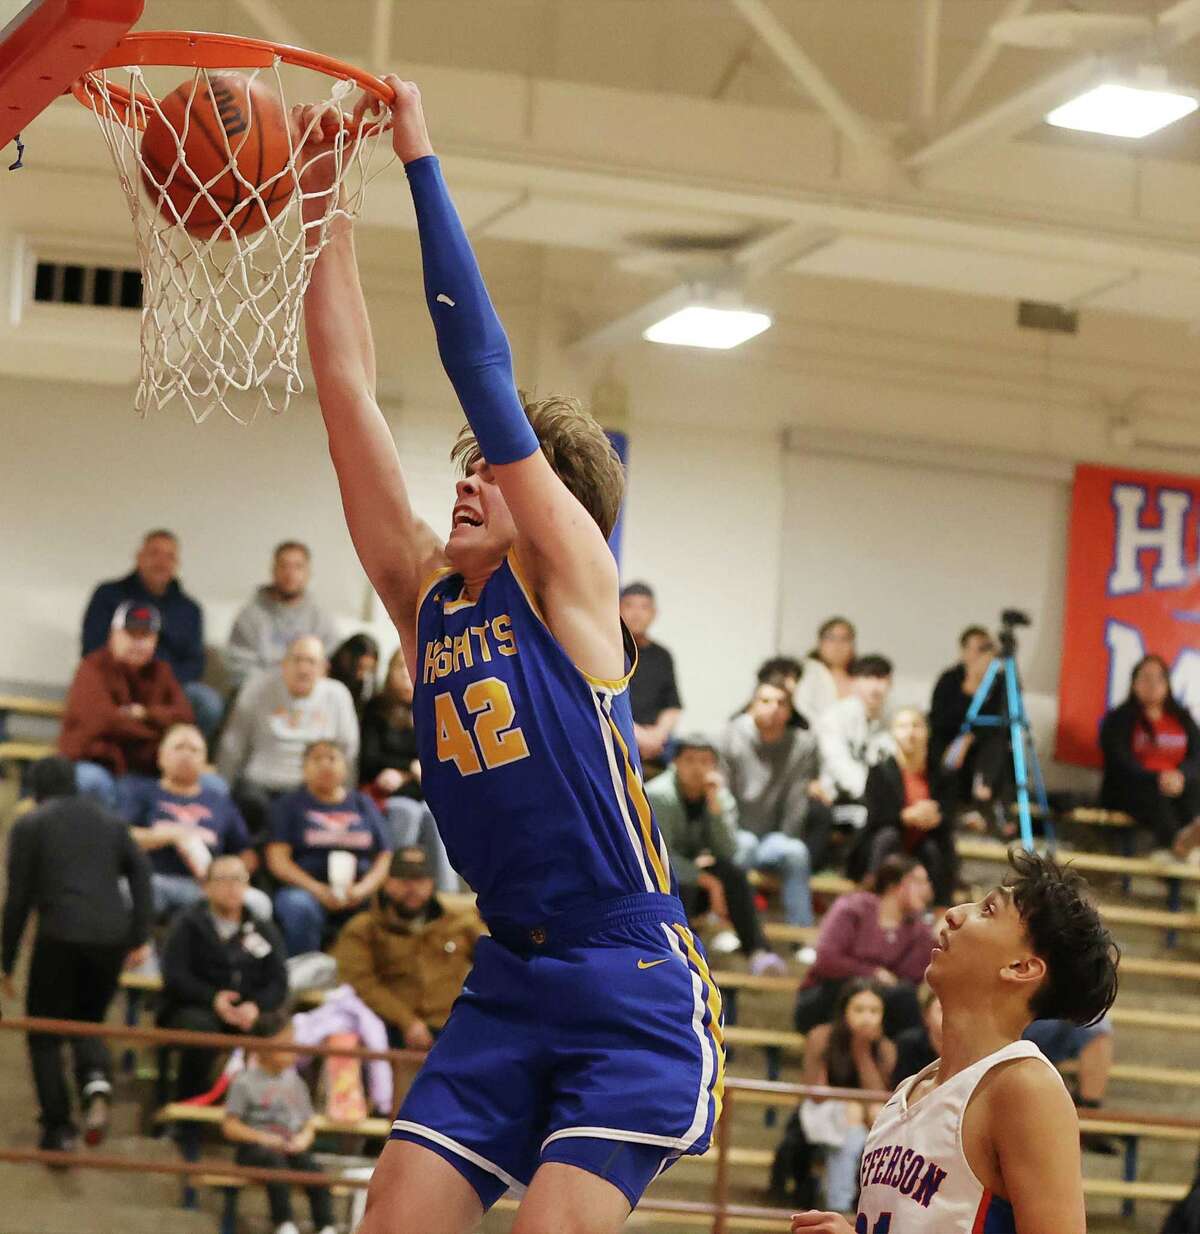 Alamo Heights’ Corbin Crocker dunks for two of his 12 points during Tuesday night’s 58-33 win at Jefferson.